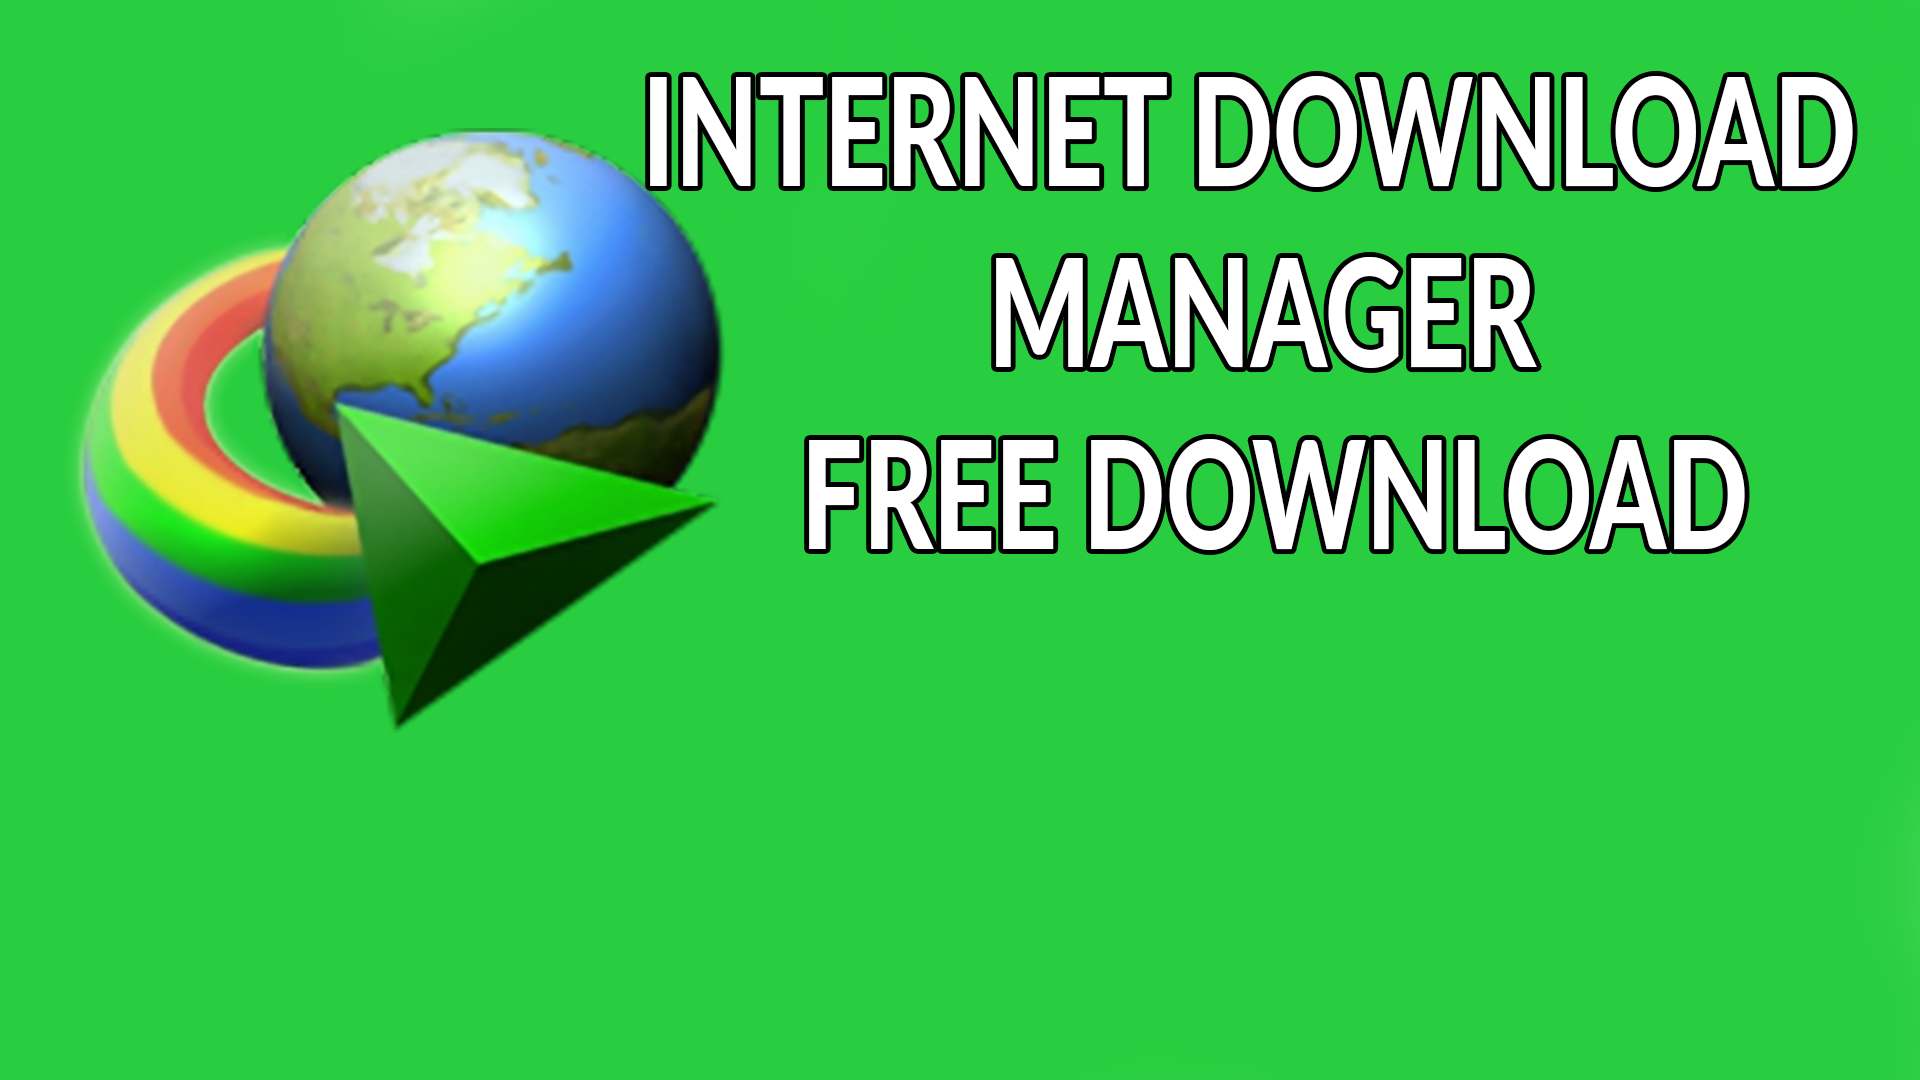 download videos from internet free